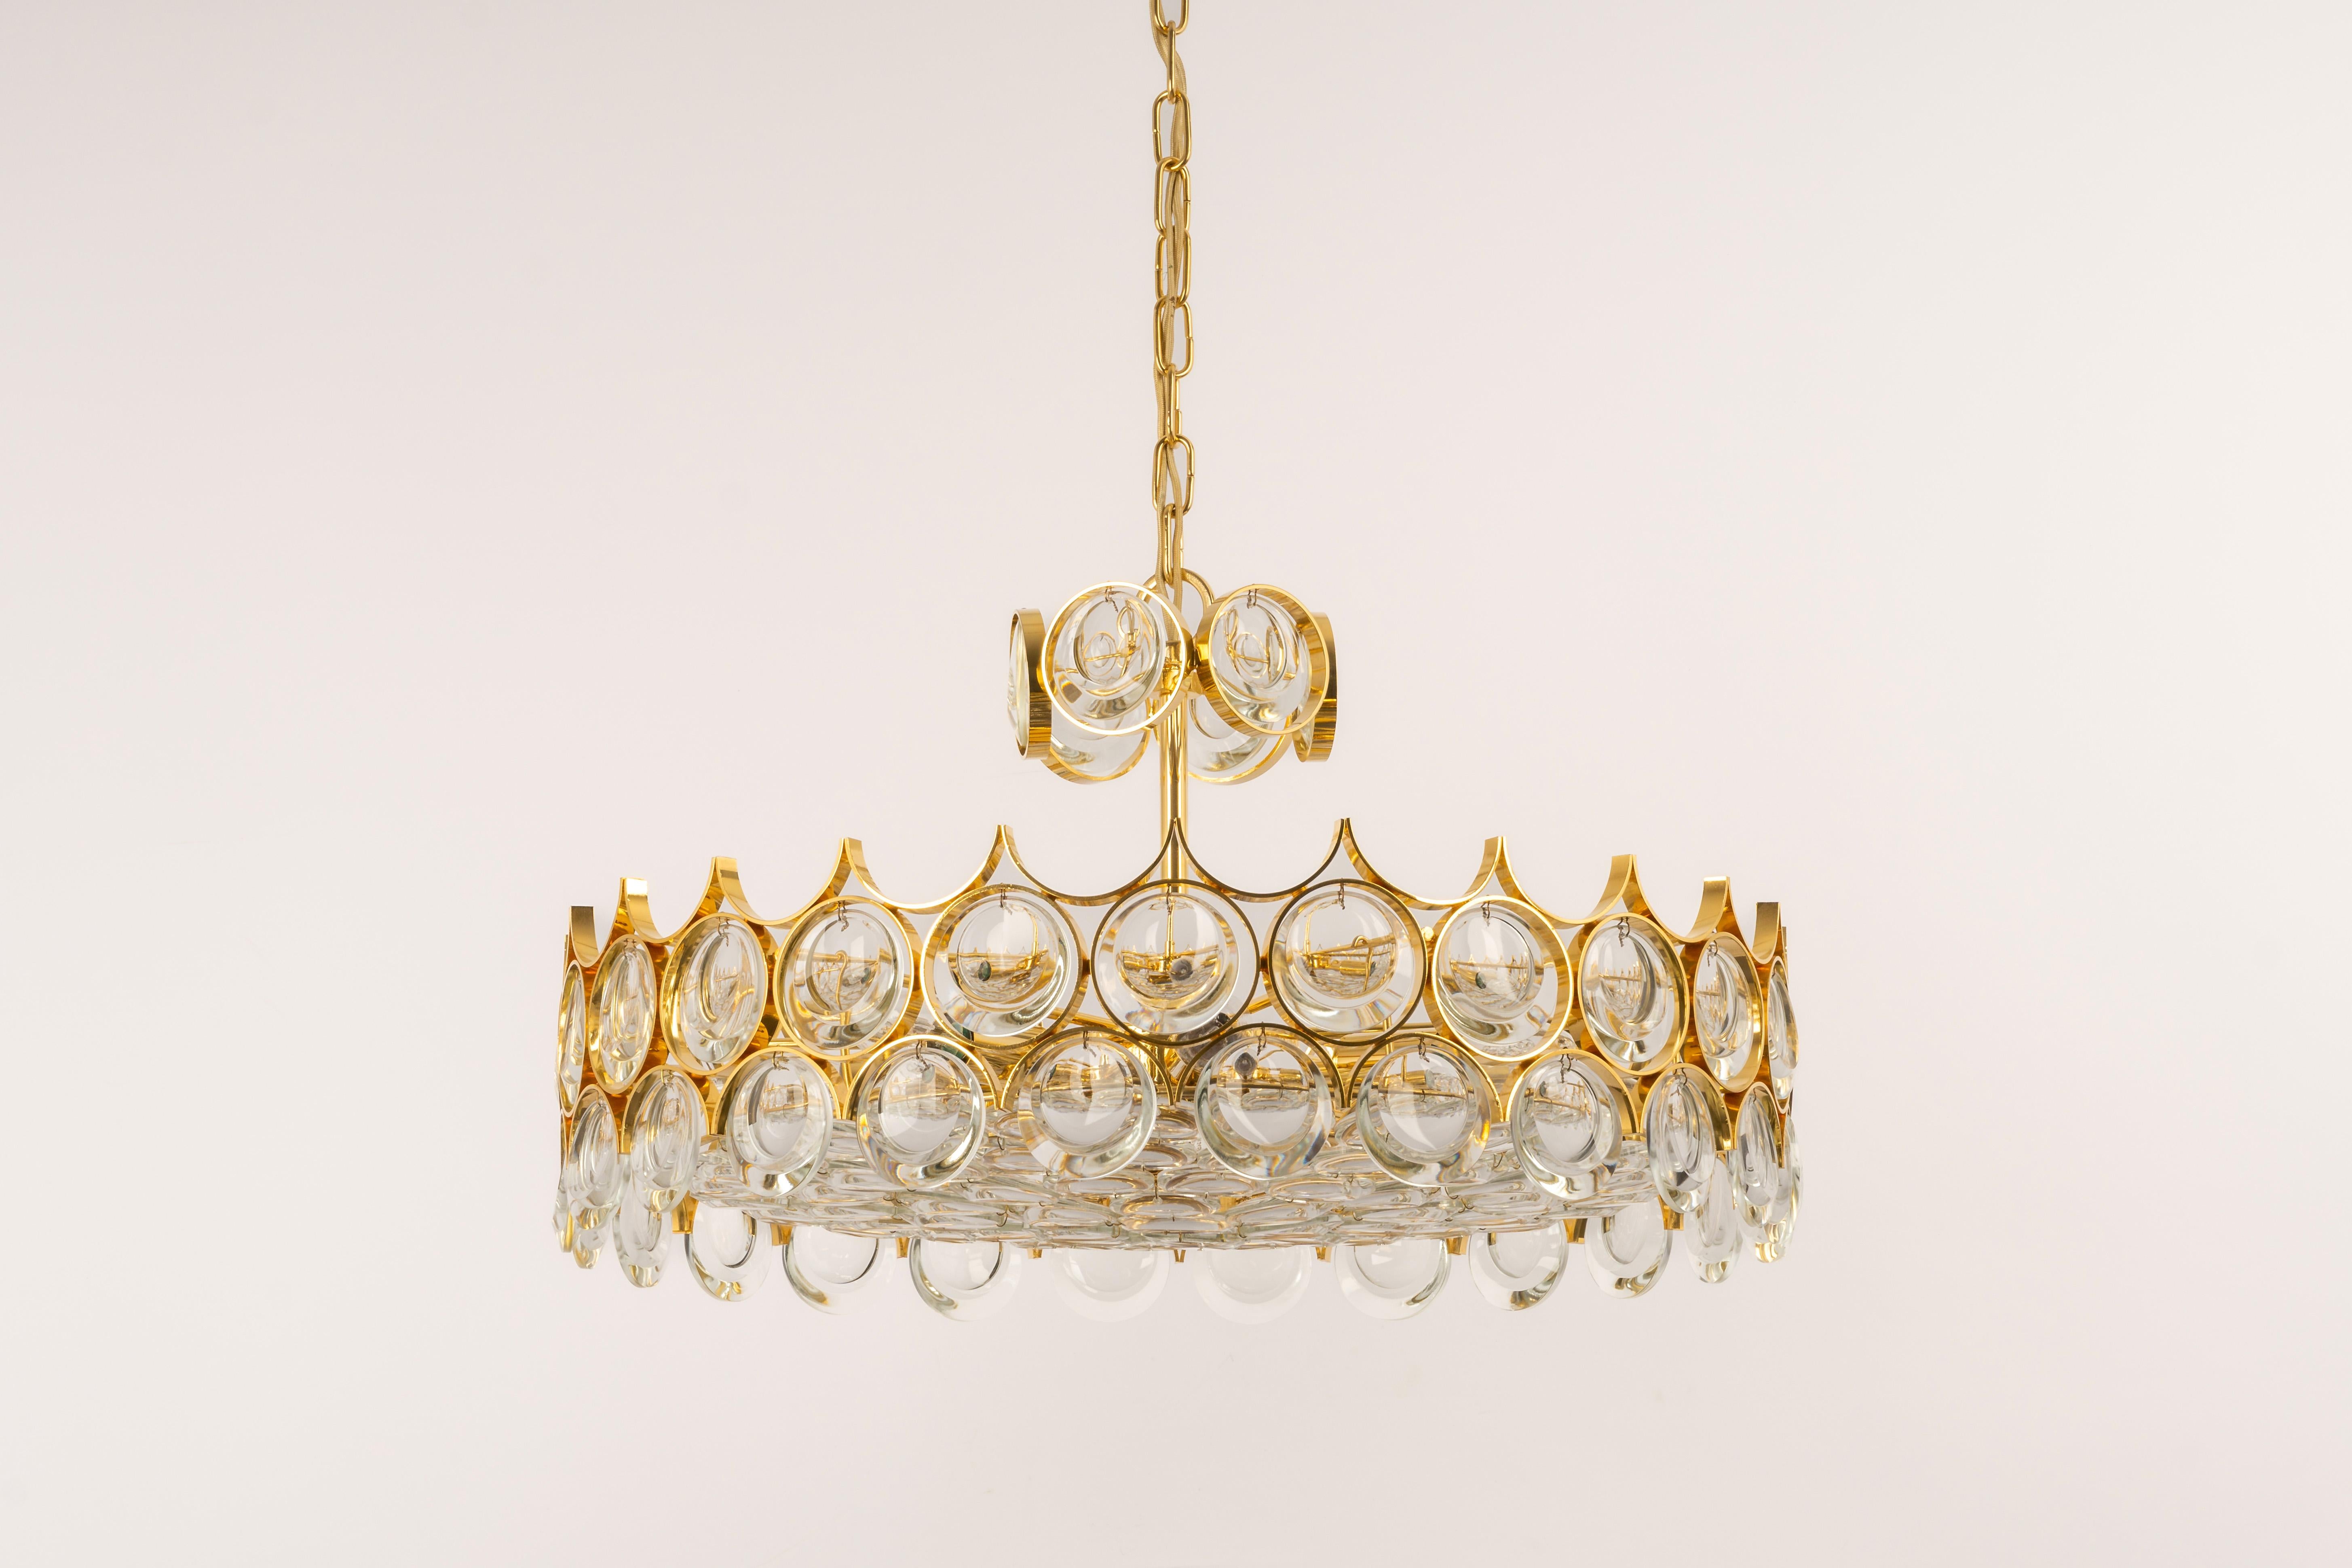 A wonderful and high-quality gilded chandelier or pendant light fixture by Palwa -Design Sciolari, Germany, 1970s.
It is made of a 24-carat gold-plated brass frame decorated with individual 